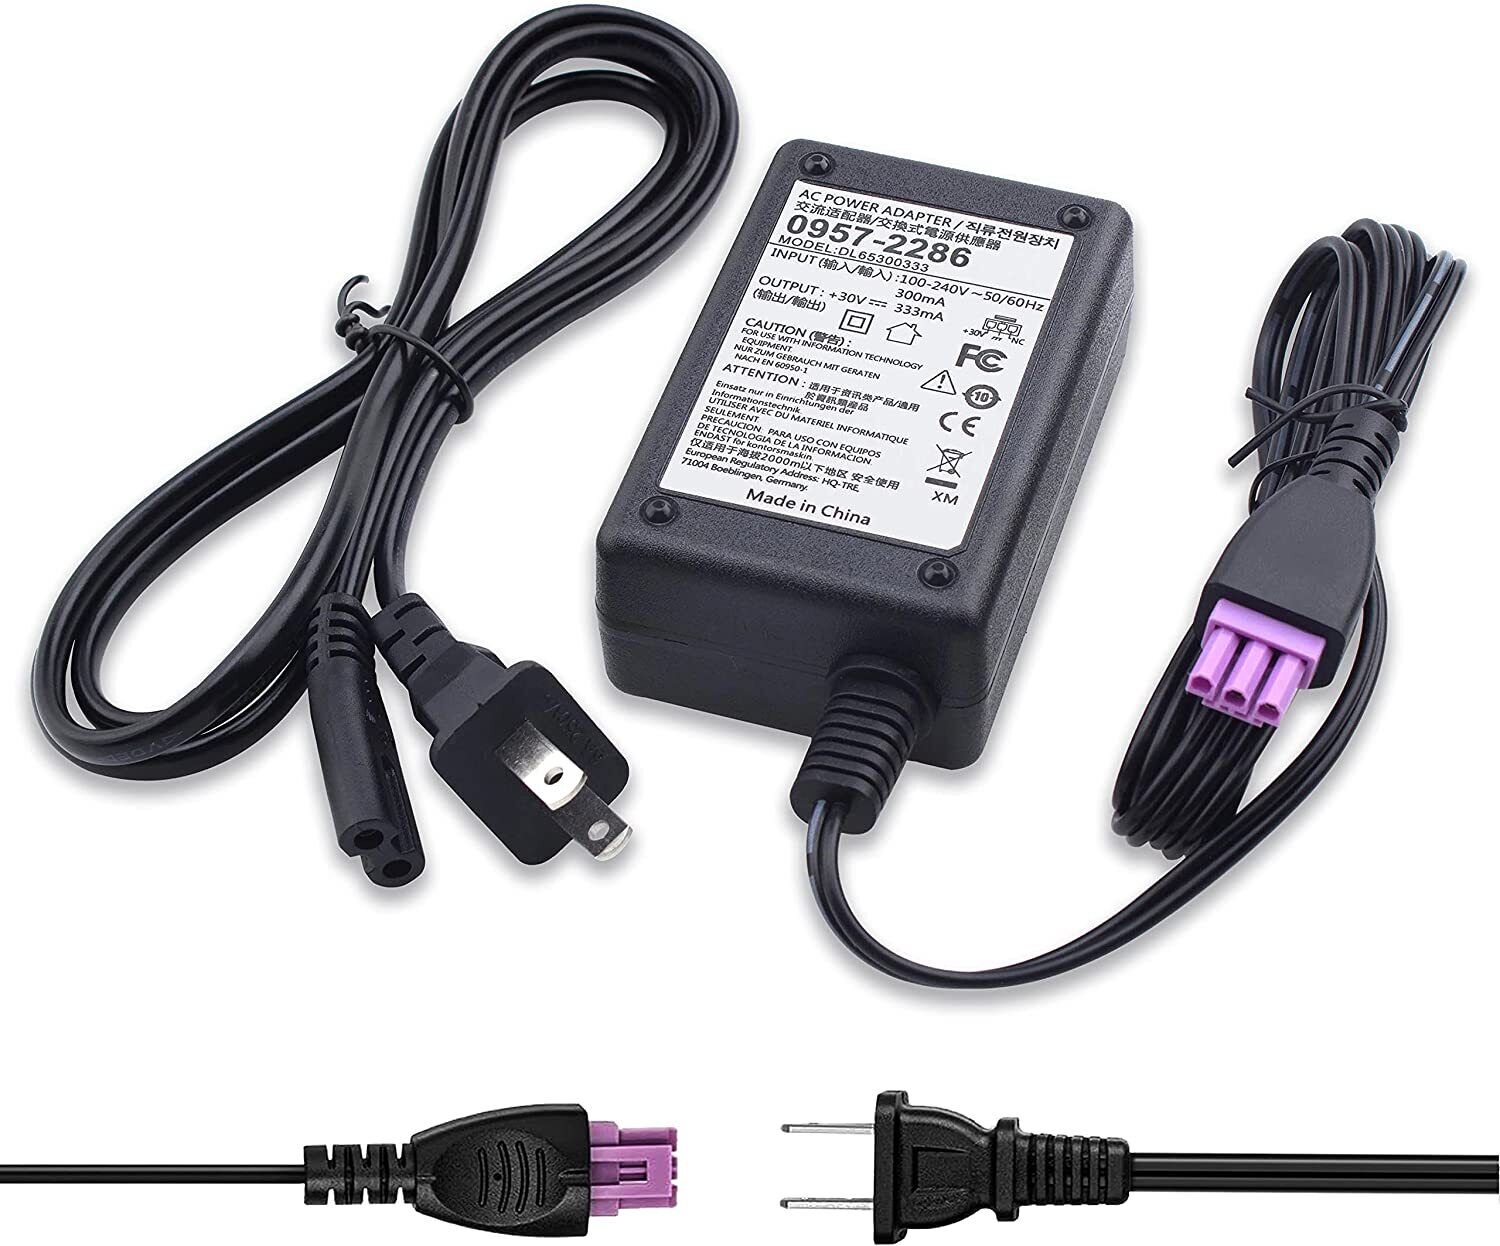 30V 333mA Ac Adapter for HP 0957-2290 0957-2398 0957-2286 Printer Power Supply